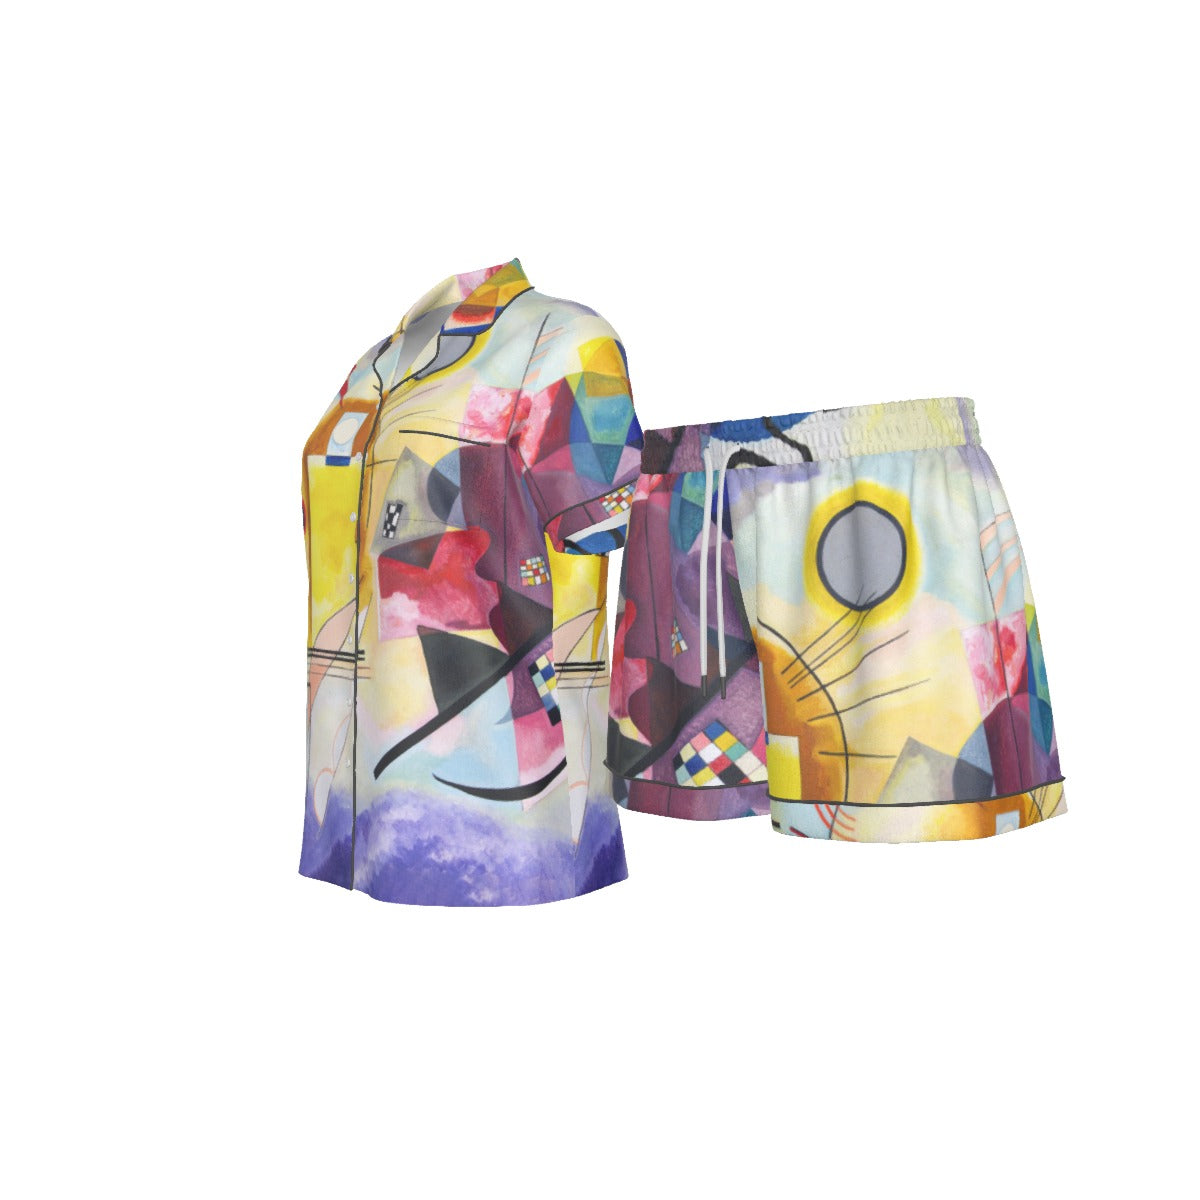 Colorful Artistic Pajamas for Women